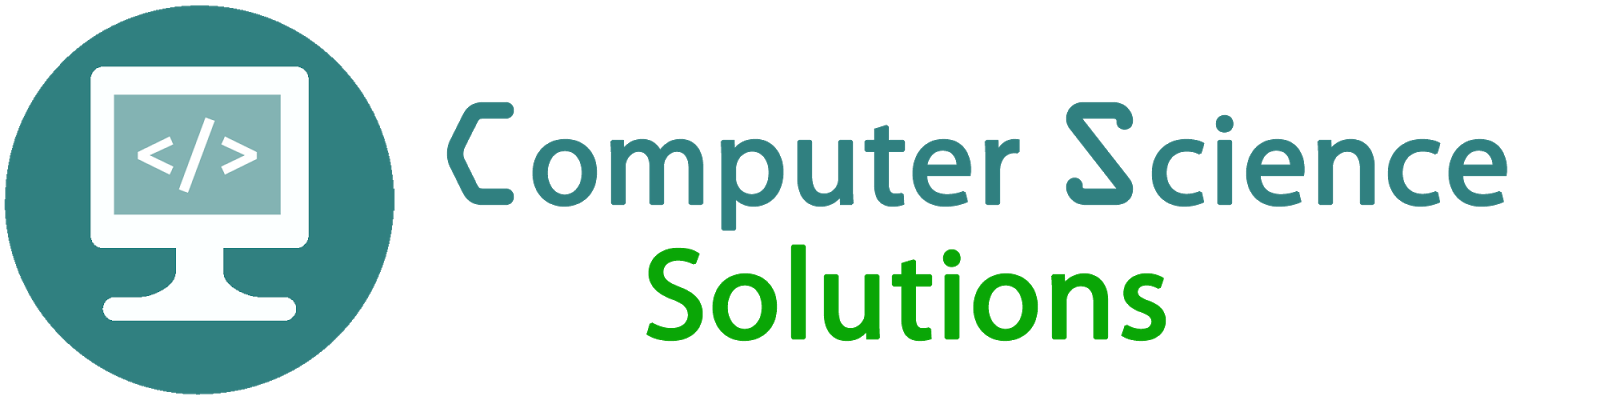 Computer Science Solutions